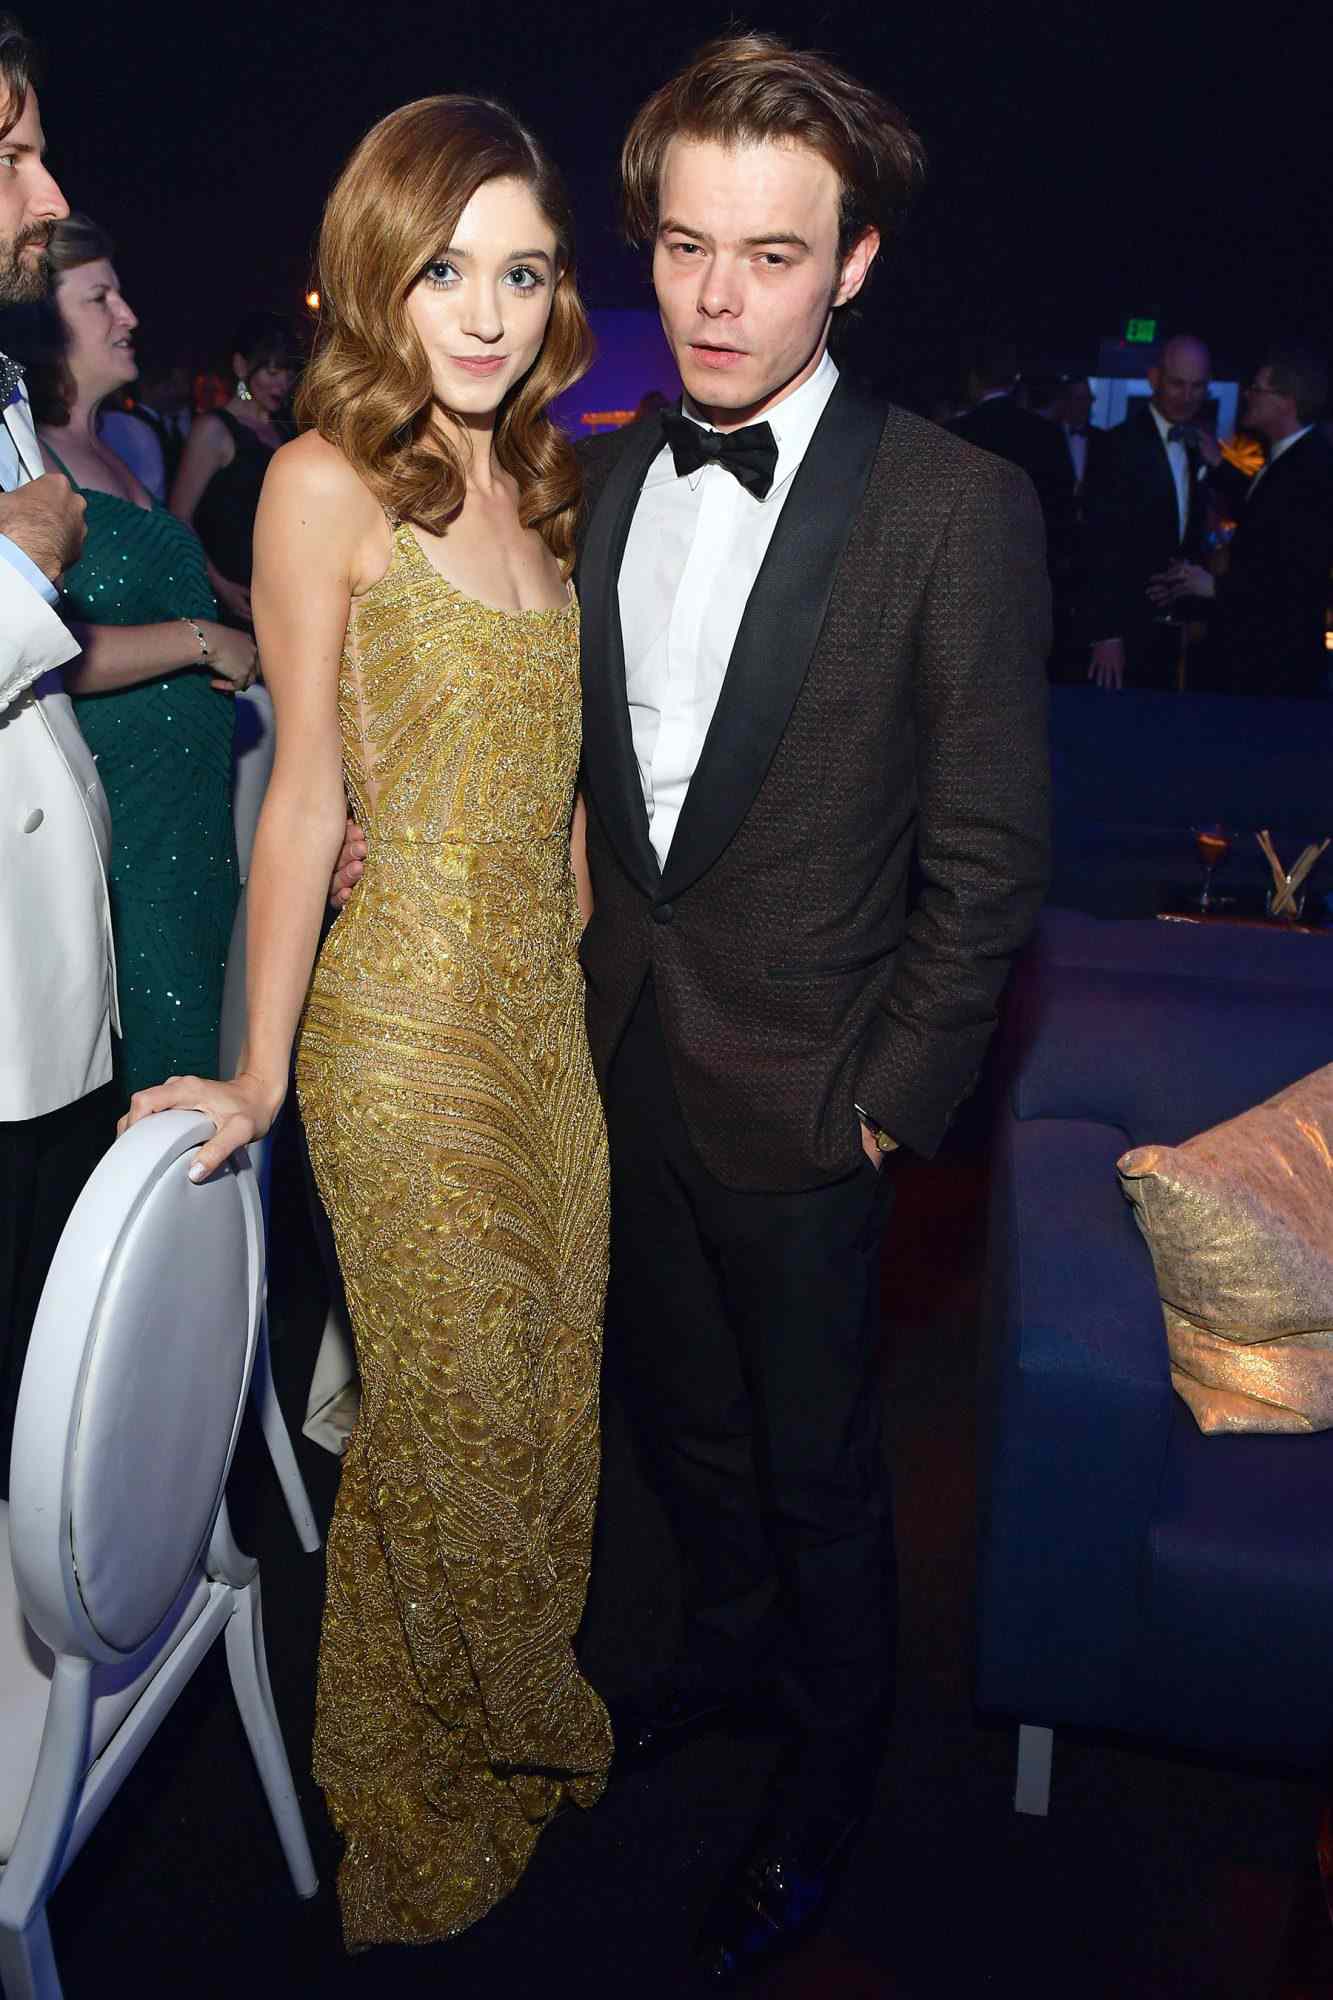 70th Emmy Awards - Governors Ball